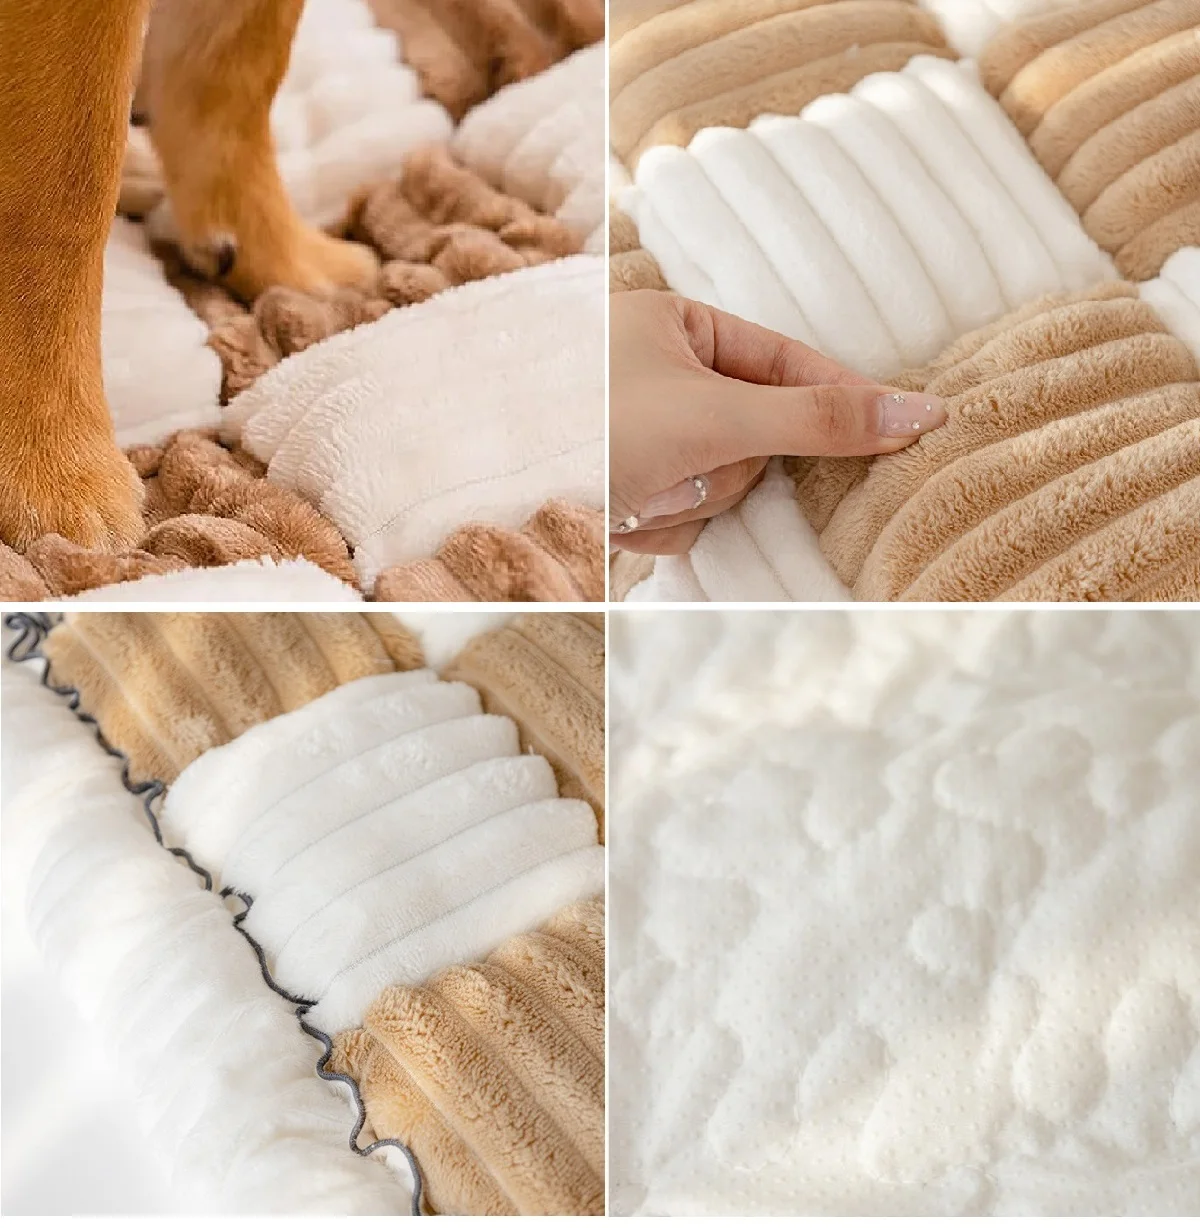 https://ae01.alicdn.com/kf/Sfa496e38e4e544579142502929097886x/Funny-Fuzzy-Couch-Covers-for-Sofa-Cream-Coloured-Large-Plaid-Square-Pet-Mat-Bed-Protective-Couch.jpg